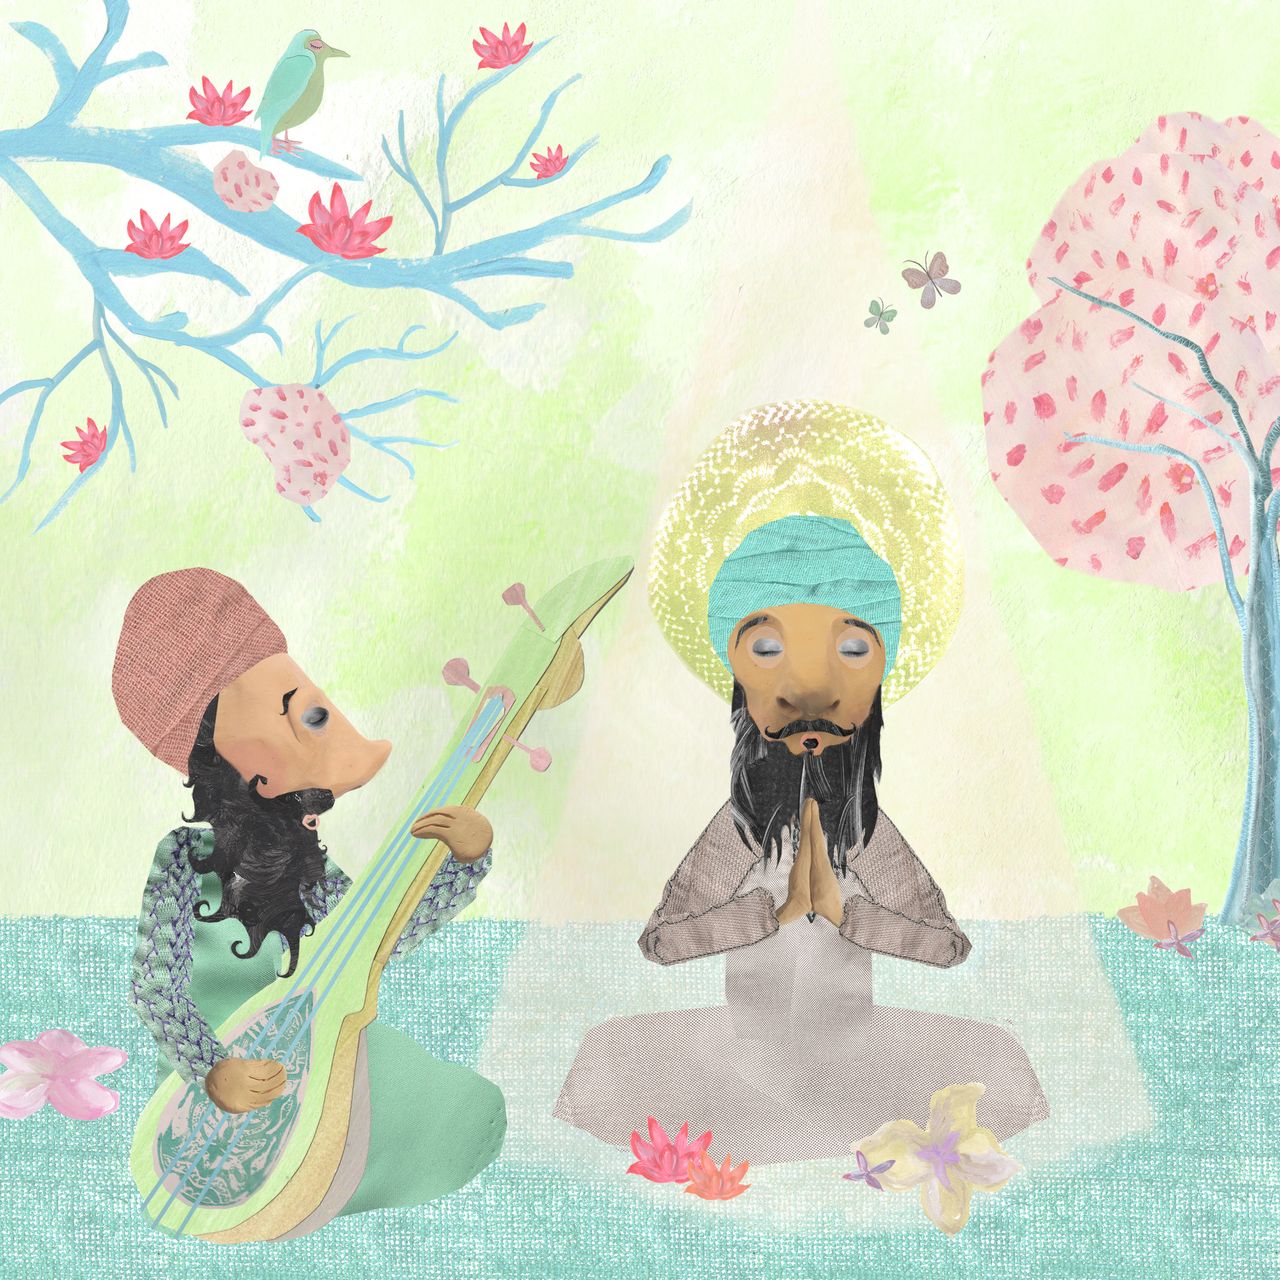 Kaur's series "The Guru" explores her relationship to the divine. The Sikh faith honors ten gurus who founded the religion, beginning with Guru Nanak in 1469 and ending with Guru Gobind Singh in 1708.